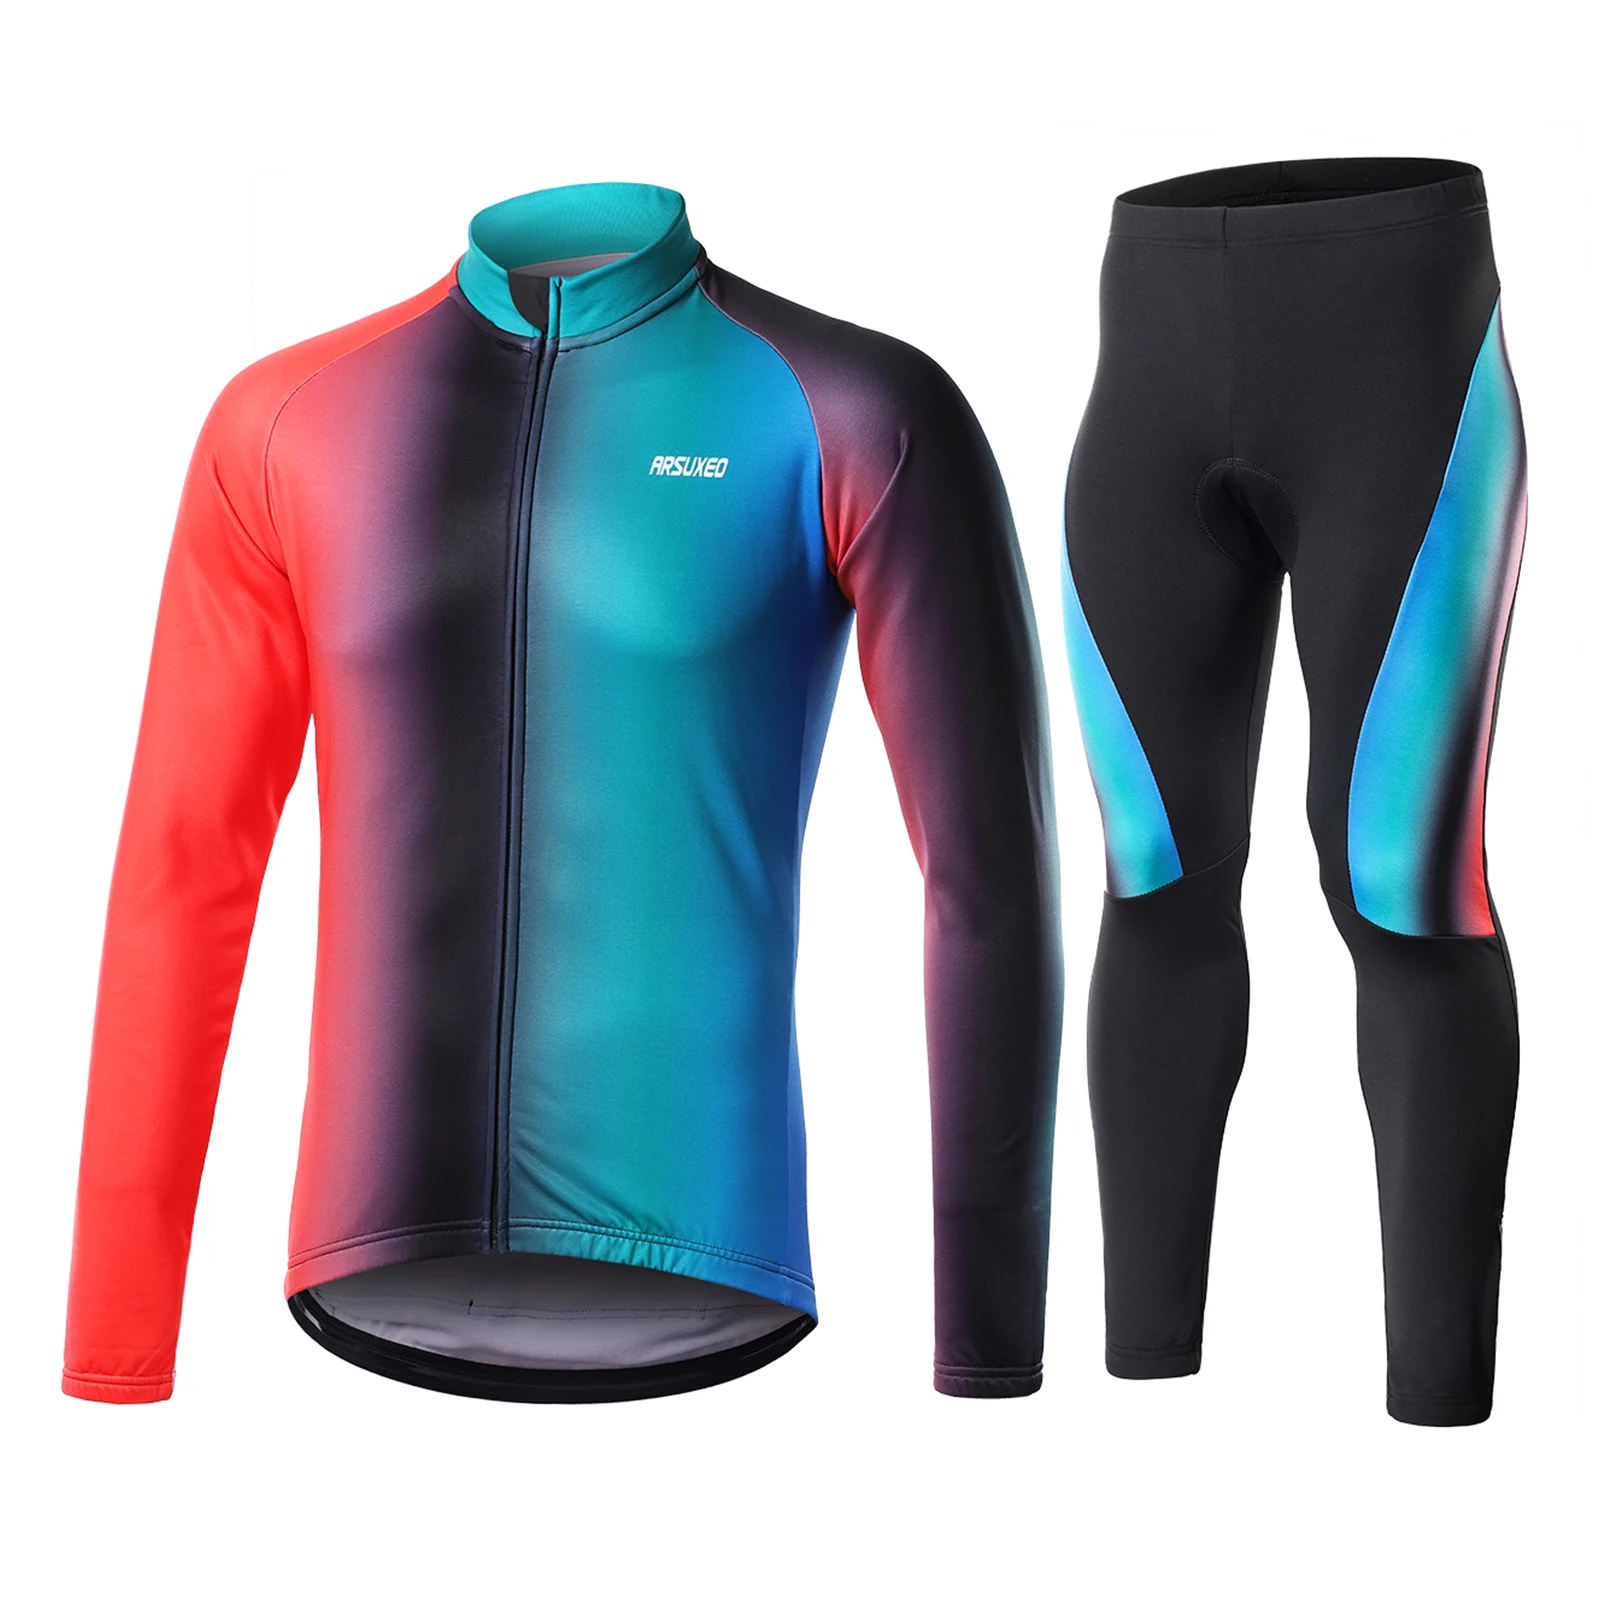 Winter Cycling Men Jersey Set Long Sleeve Fleece Lined Warm Mountain Road Bicycle Shirt with Padded Pants Bike Jacket Outfit